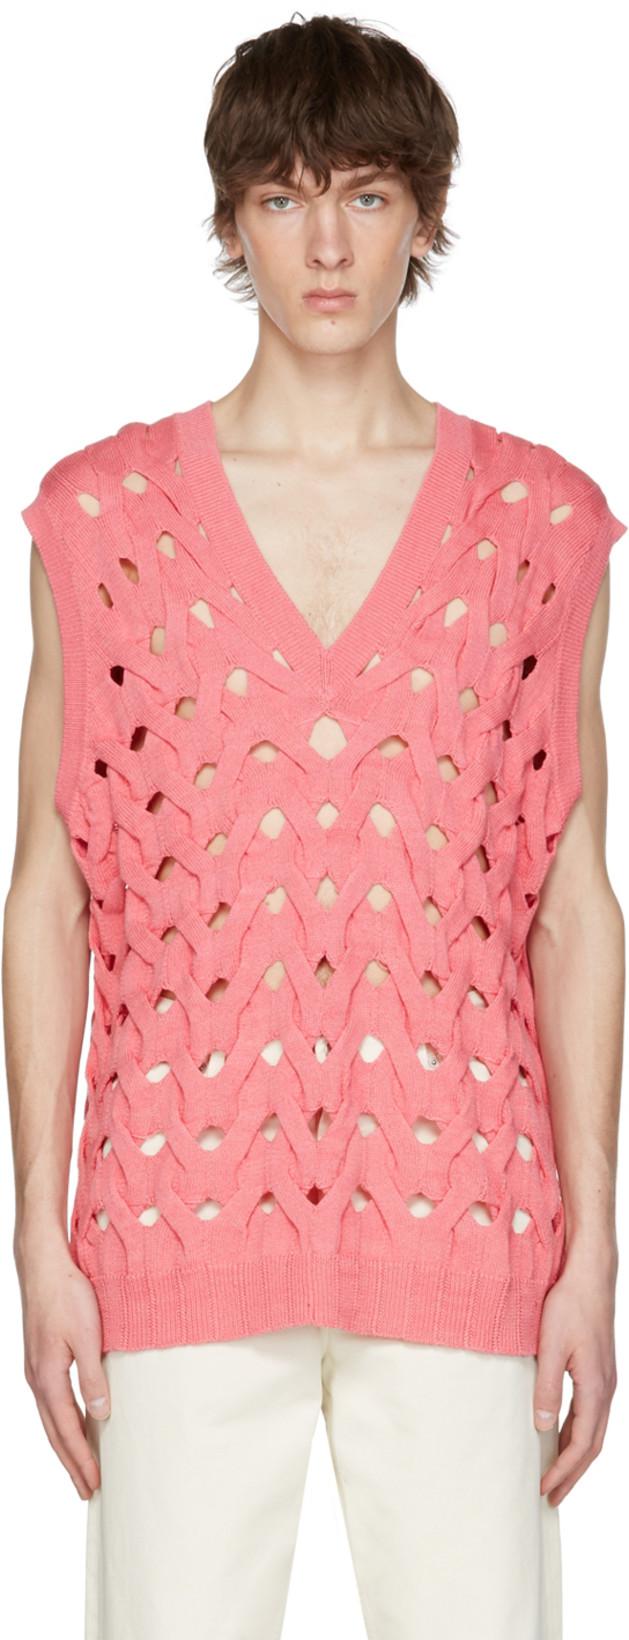 Pink Cotton Vest by A PERSONAL NOTE 73